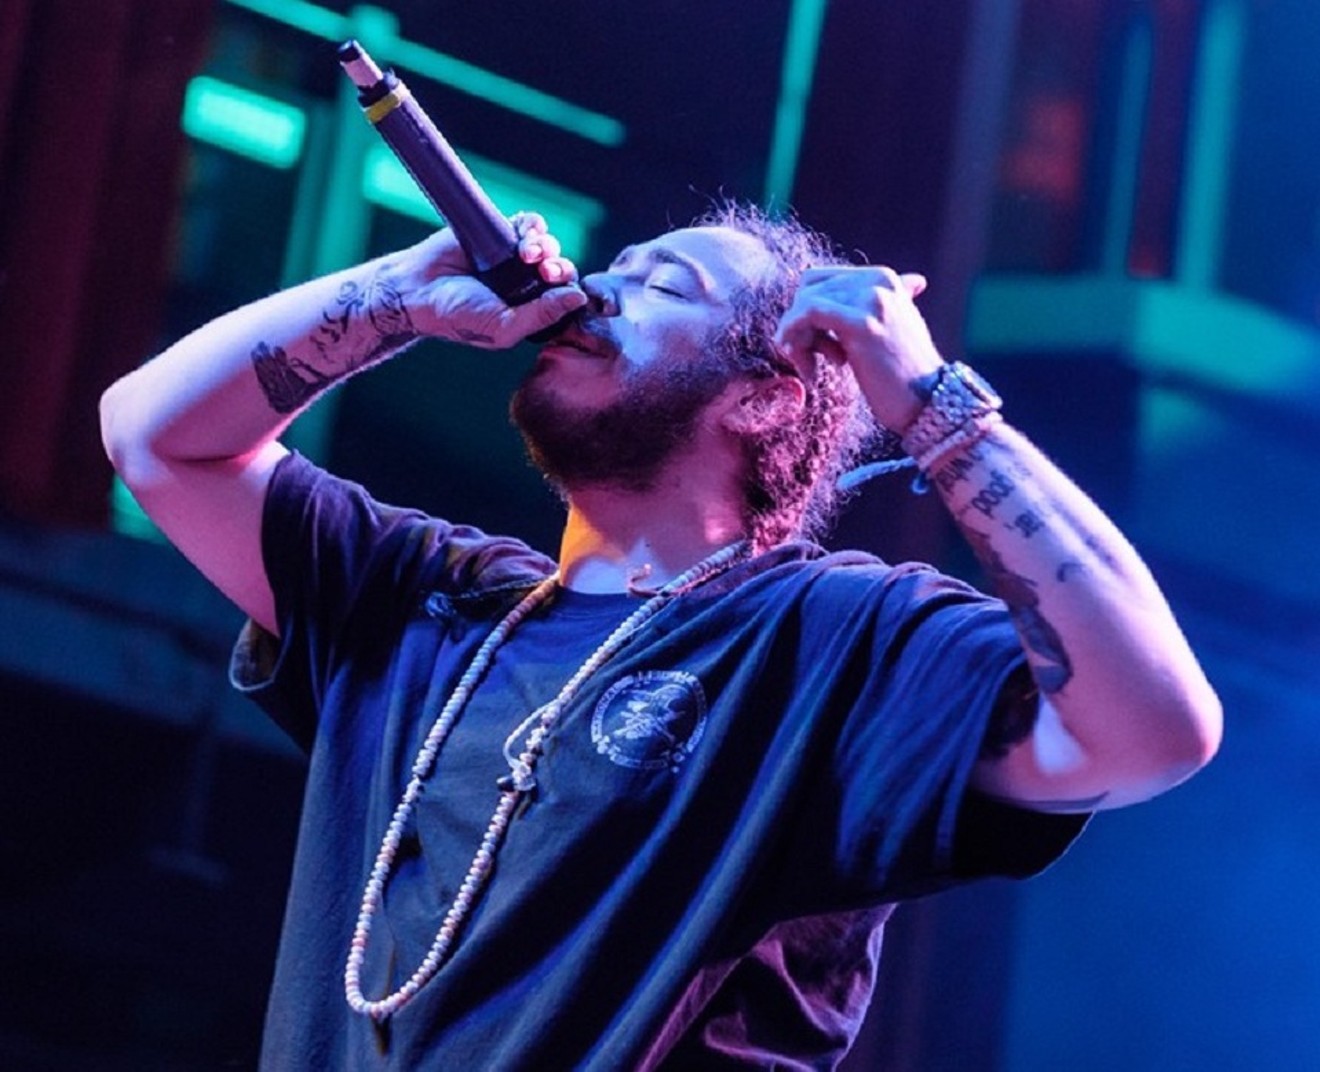 Post Malone is still North Texas' most popular artist according to streams.